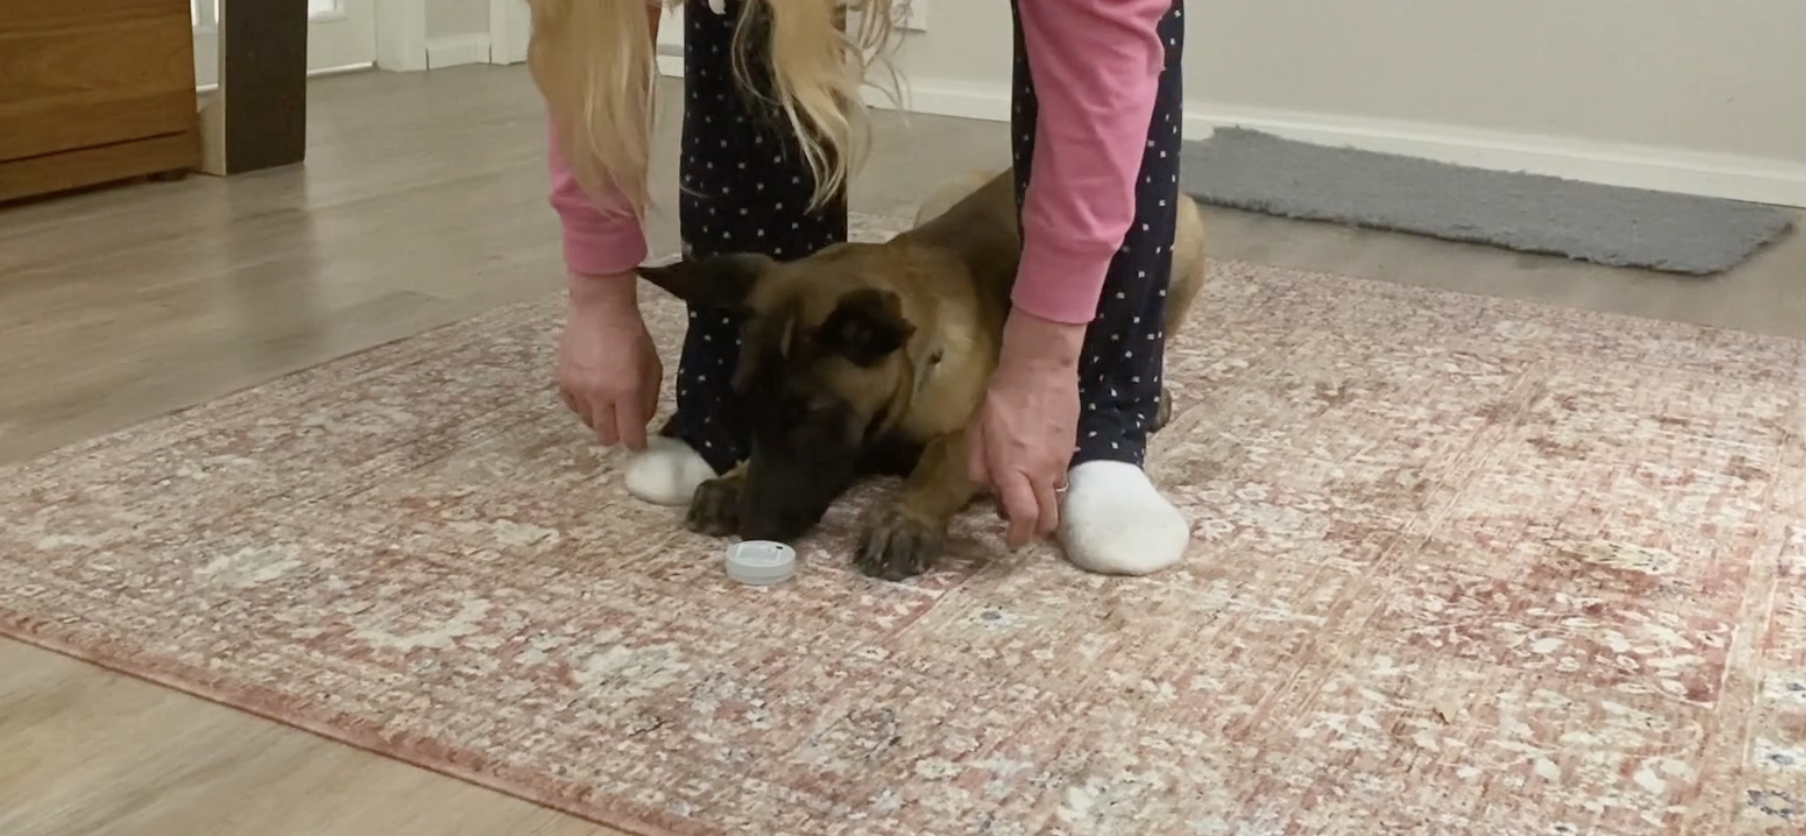 Article indication training for IGP puppy